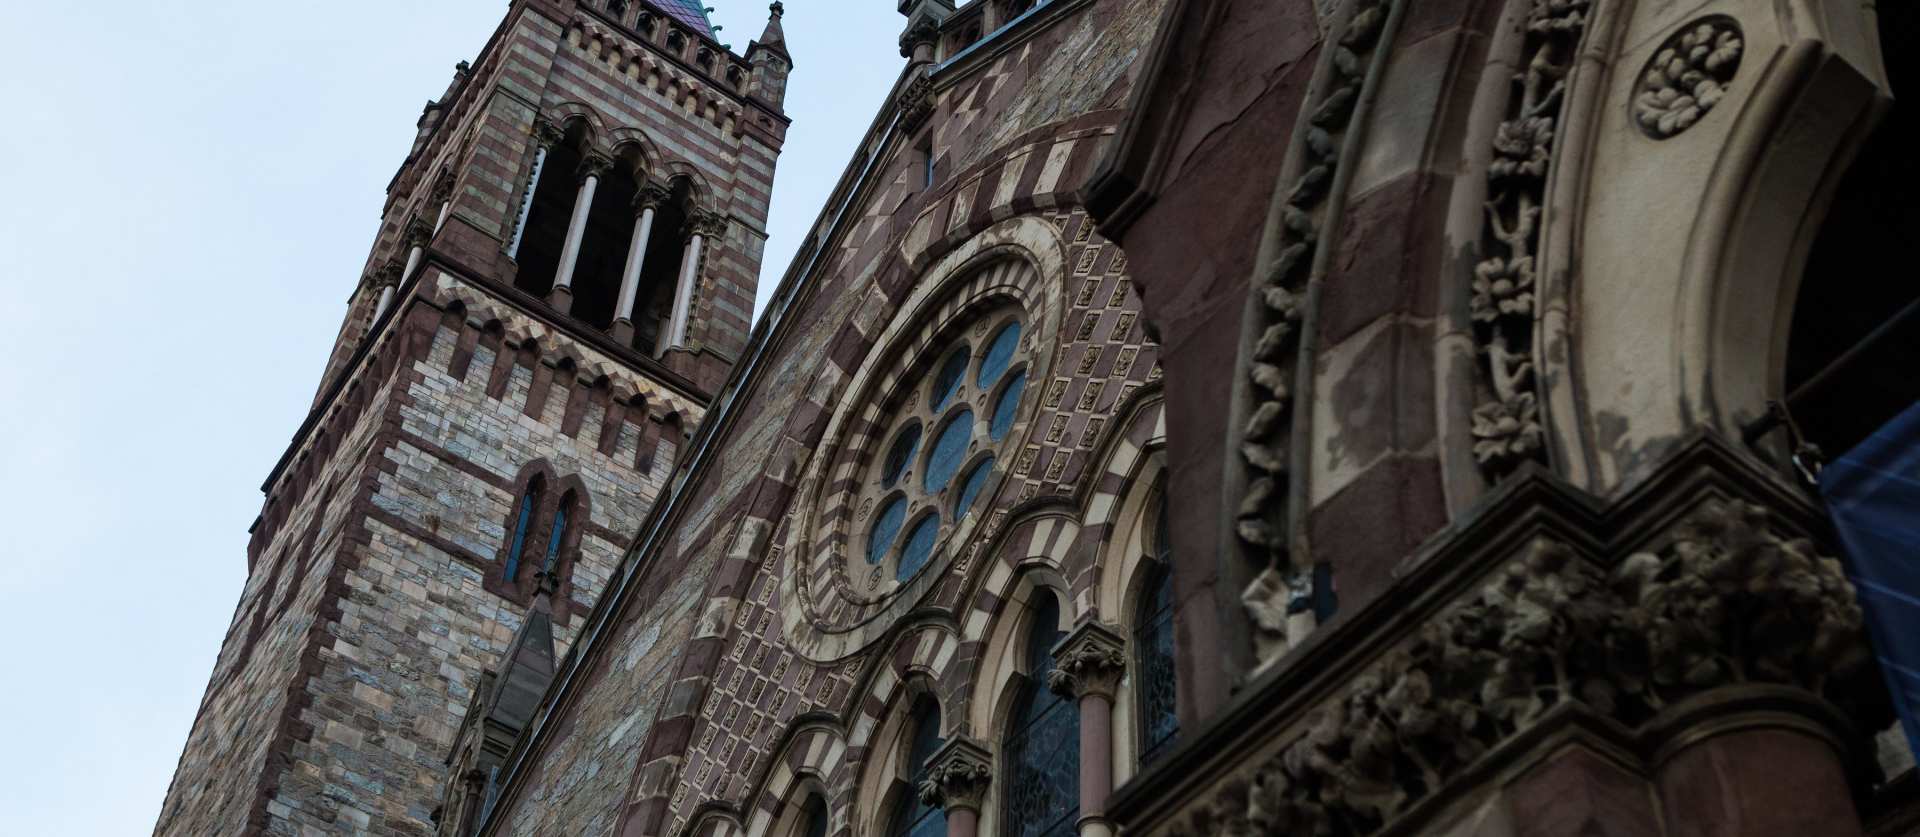 Exterior of Old South Church in Boston - gothic, stone architecture with a grand tower